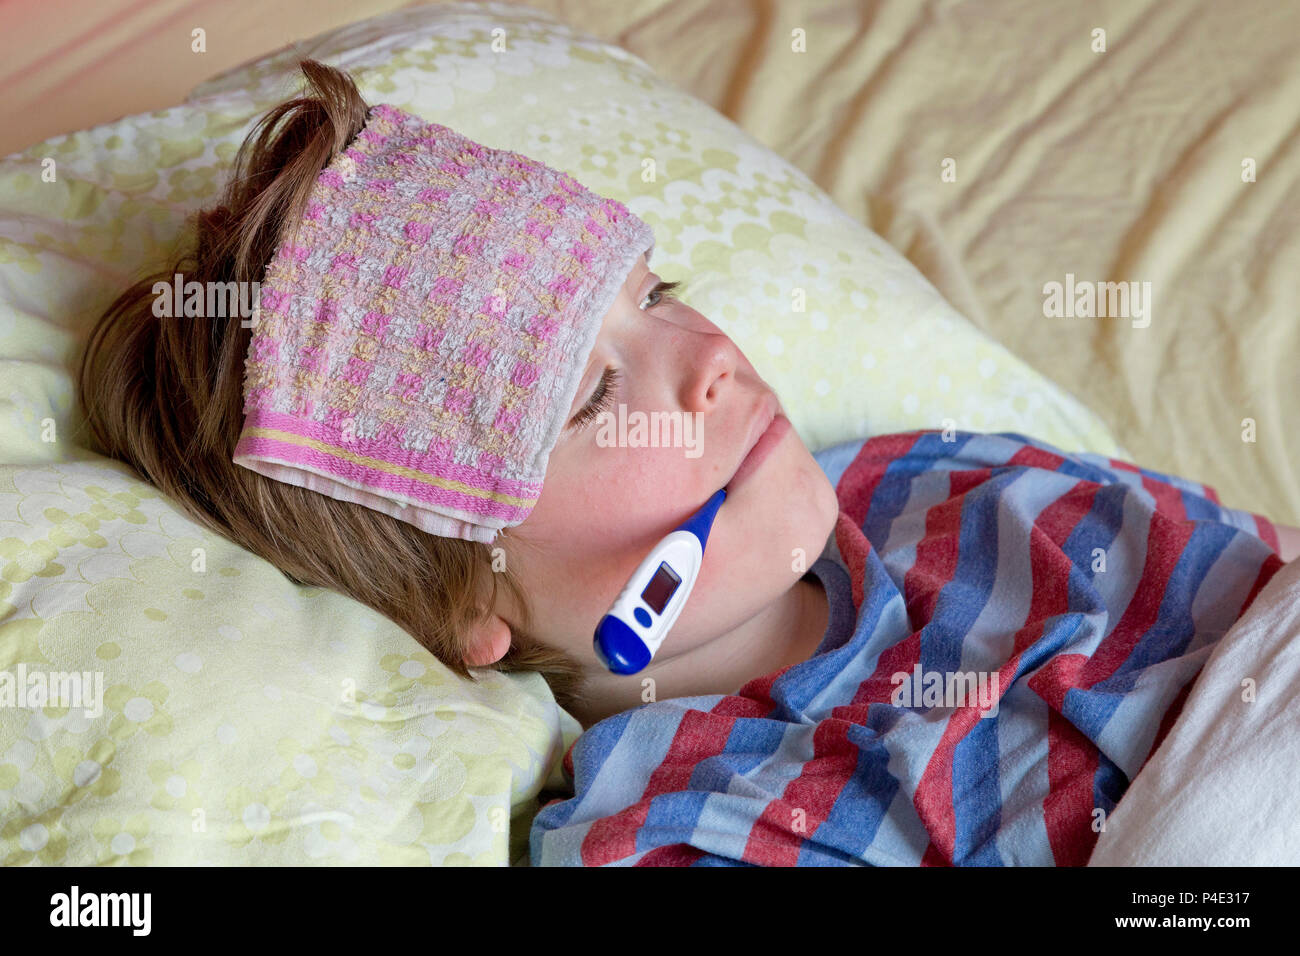 boy lying in bed ill Stock Photo